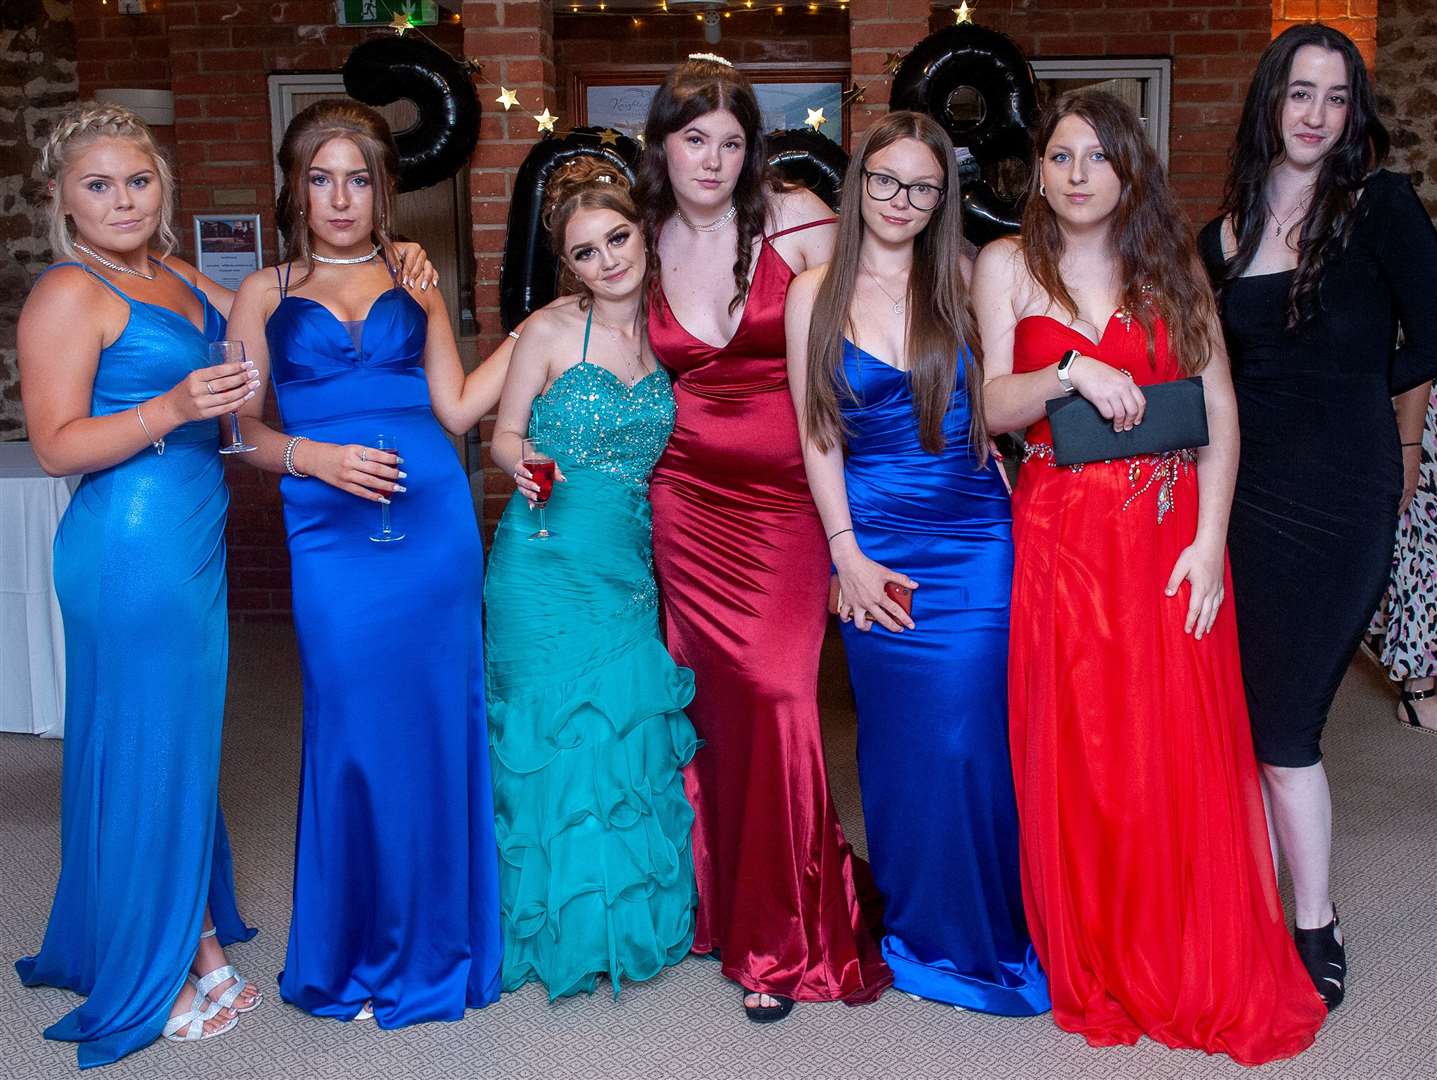 St Clement’s High School, Terrington St Clements’ prom at Knights Hill, King's Lynn